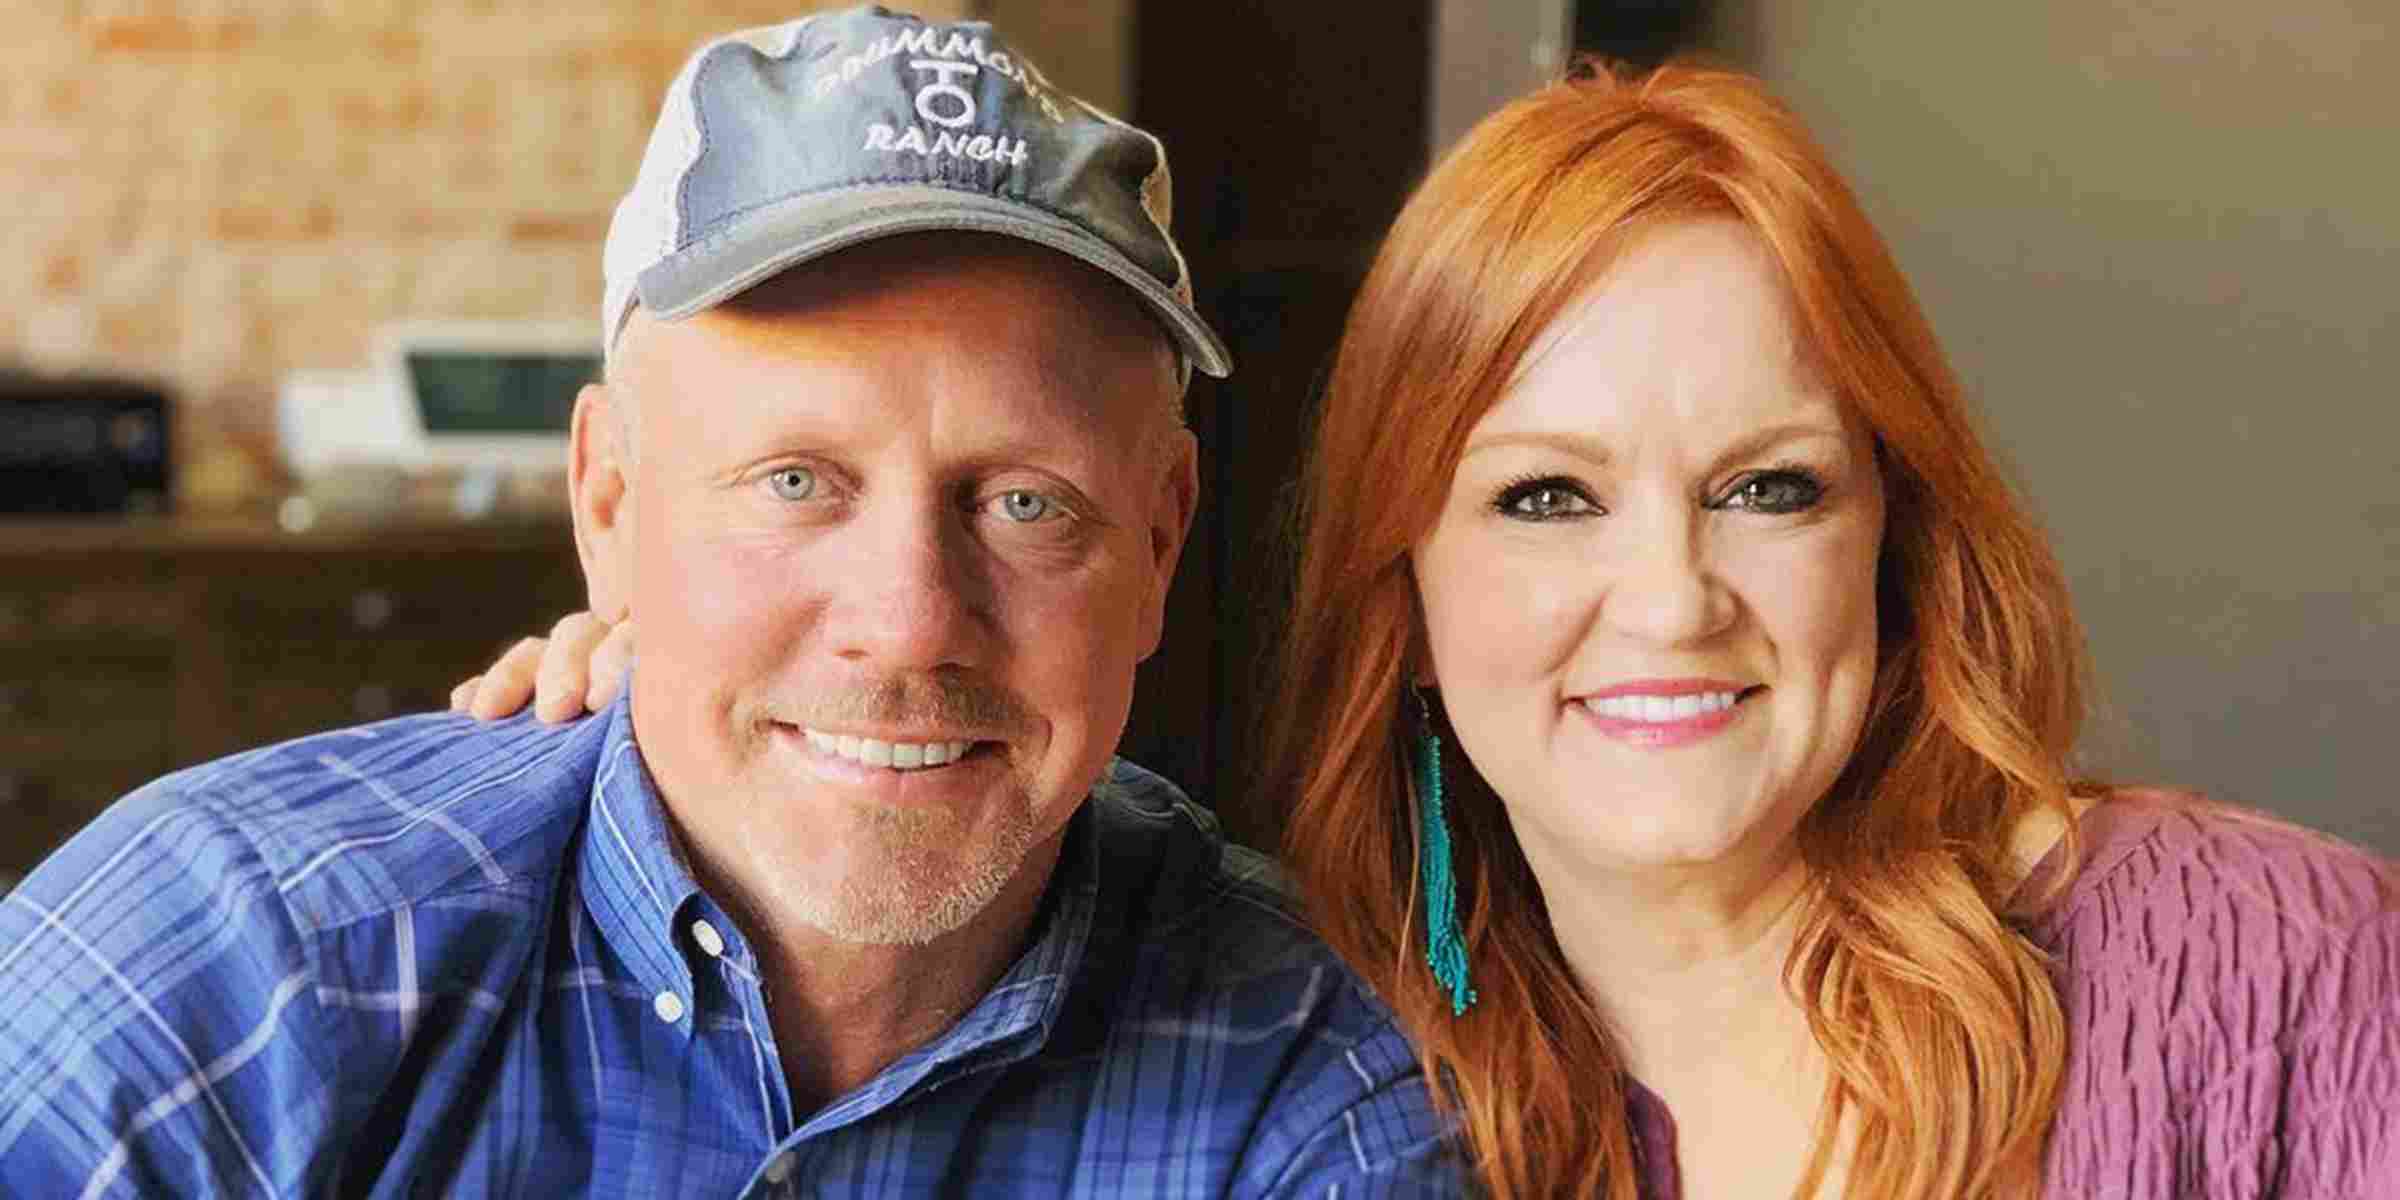 Image of American rancher and his wife, Ree Drummond